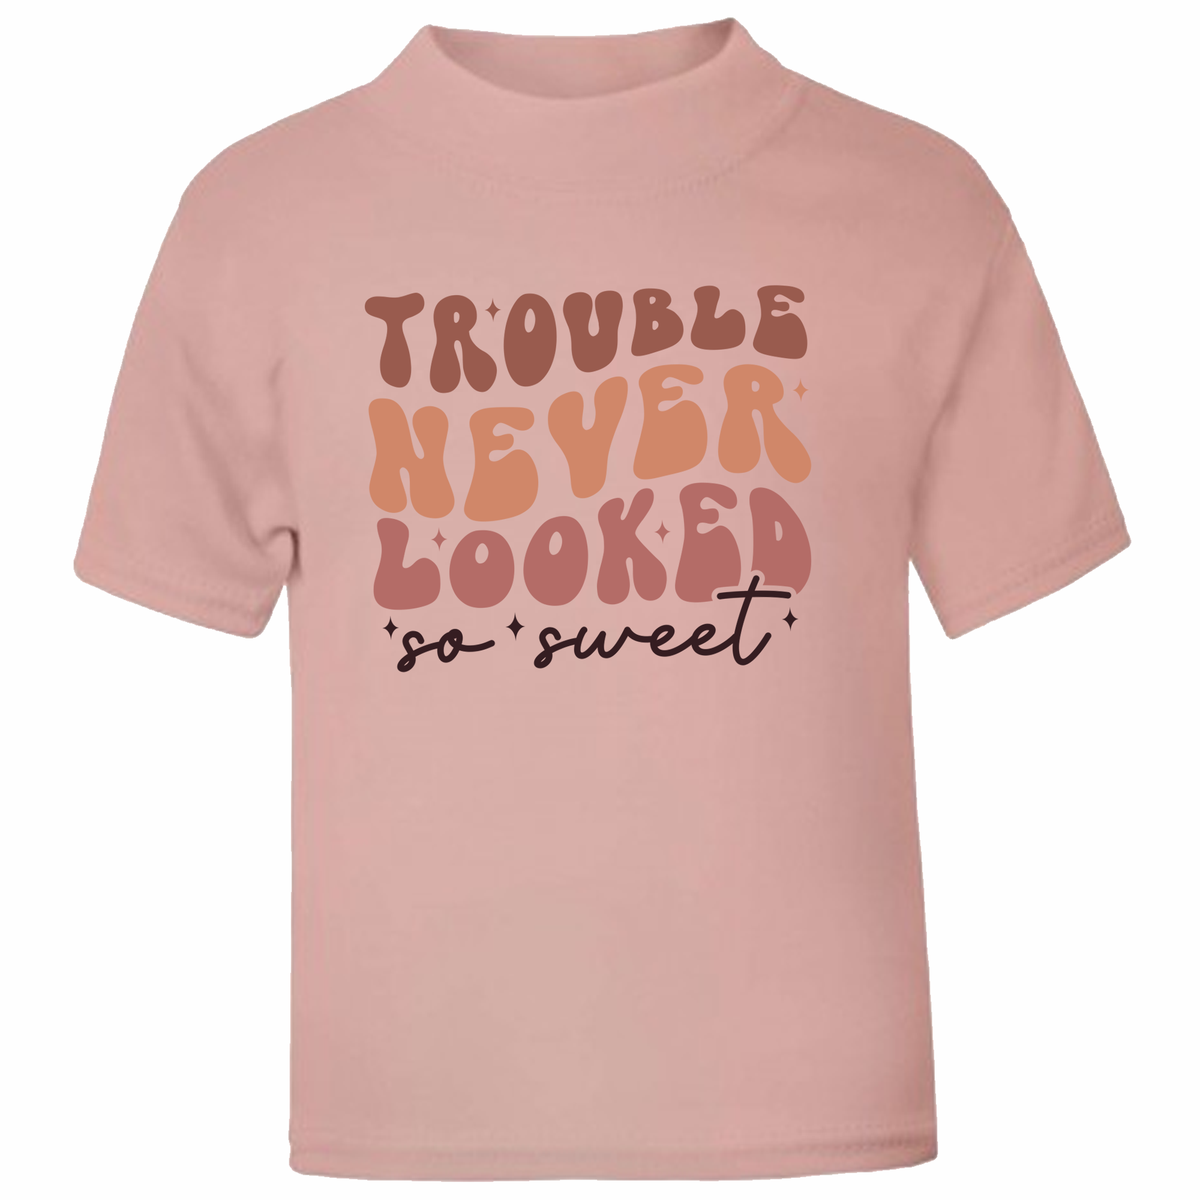 Trouble Never Looked So Sweet - t-shirt - more colour options